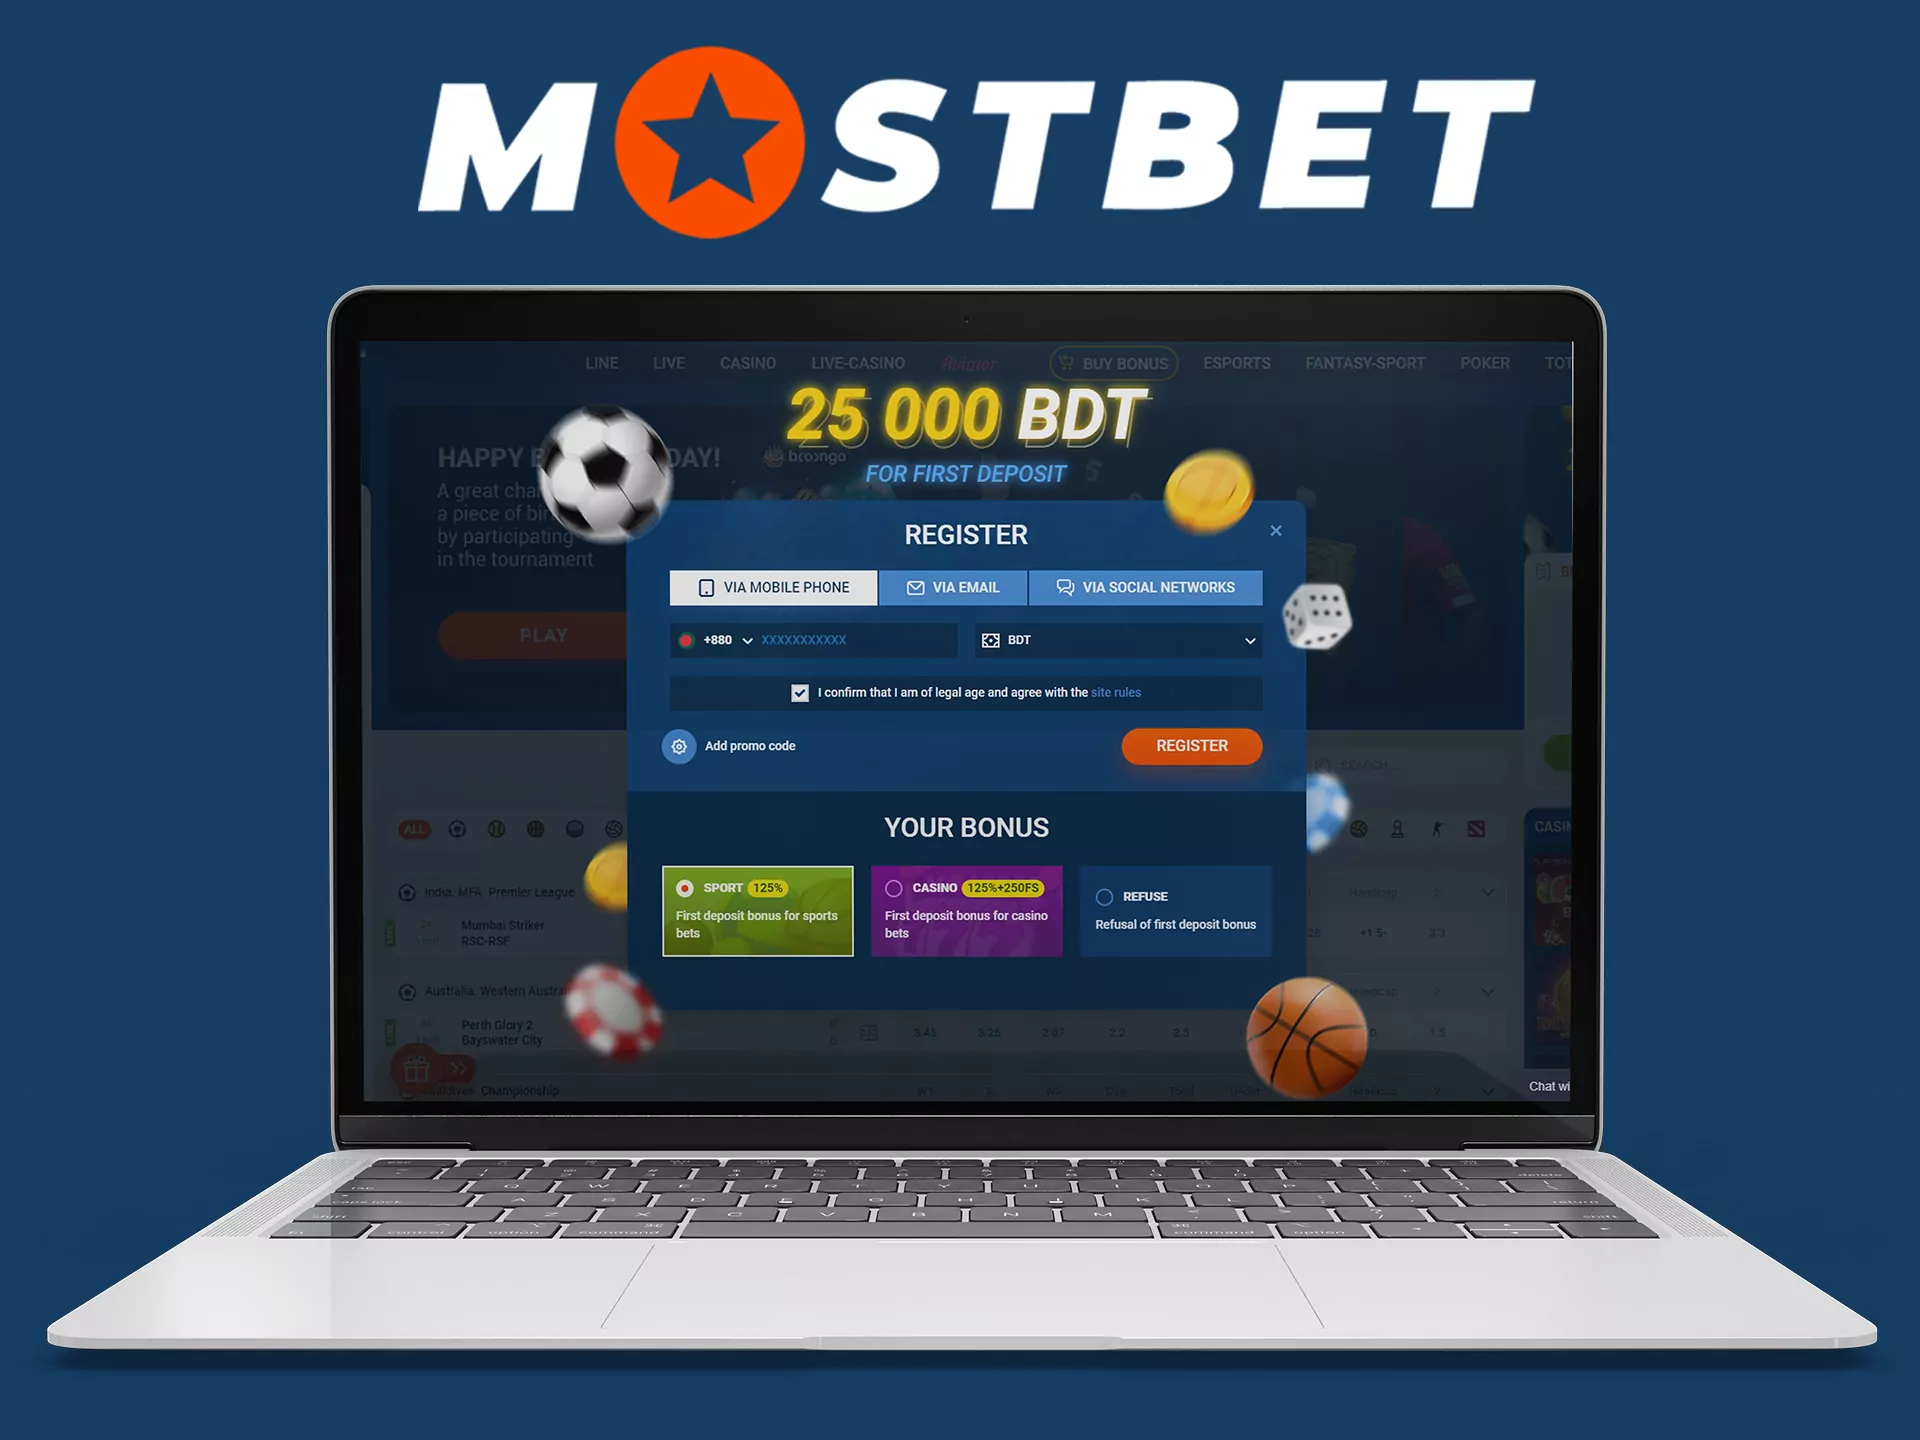 Go through Mostbet registration process and start online betting